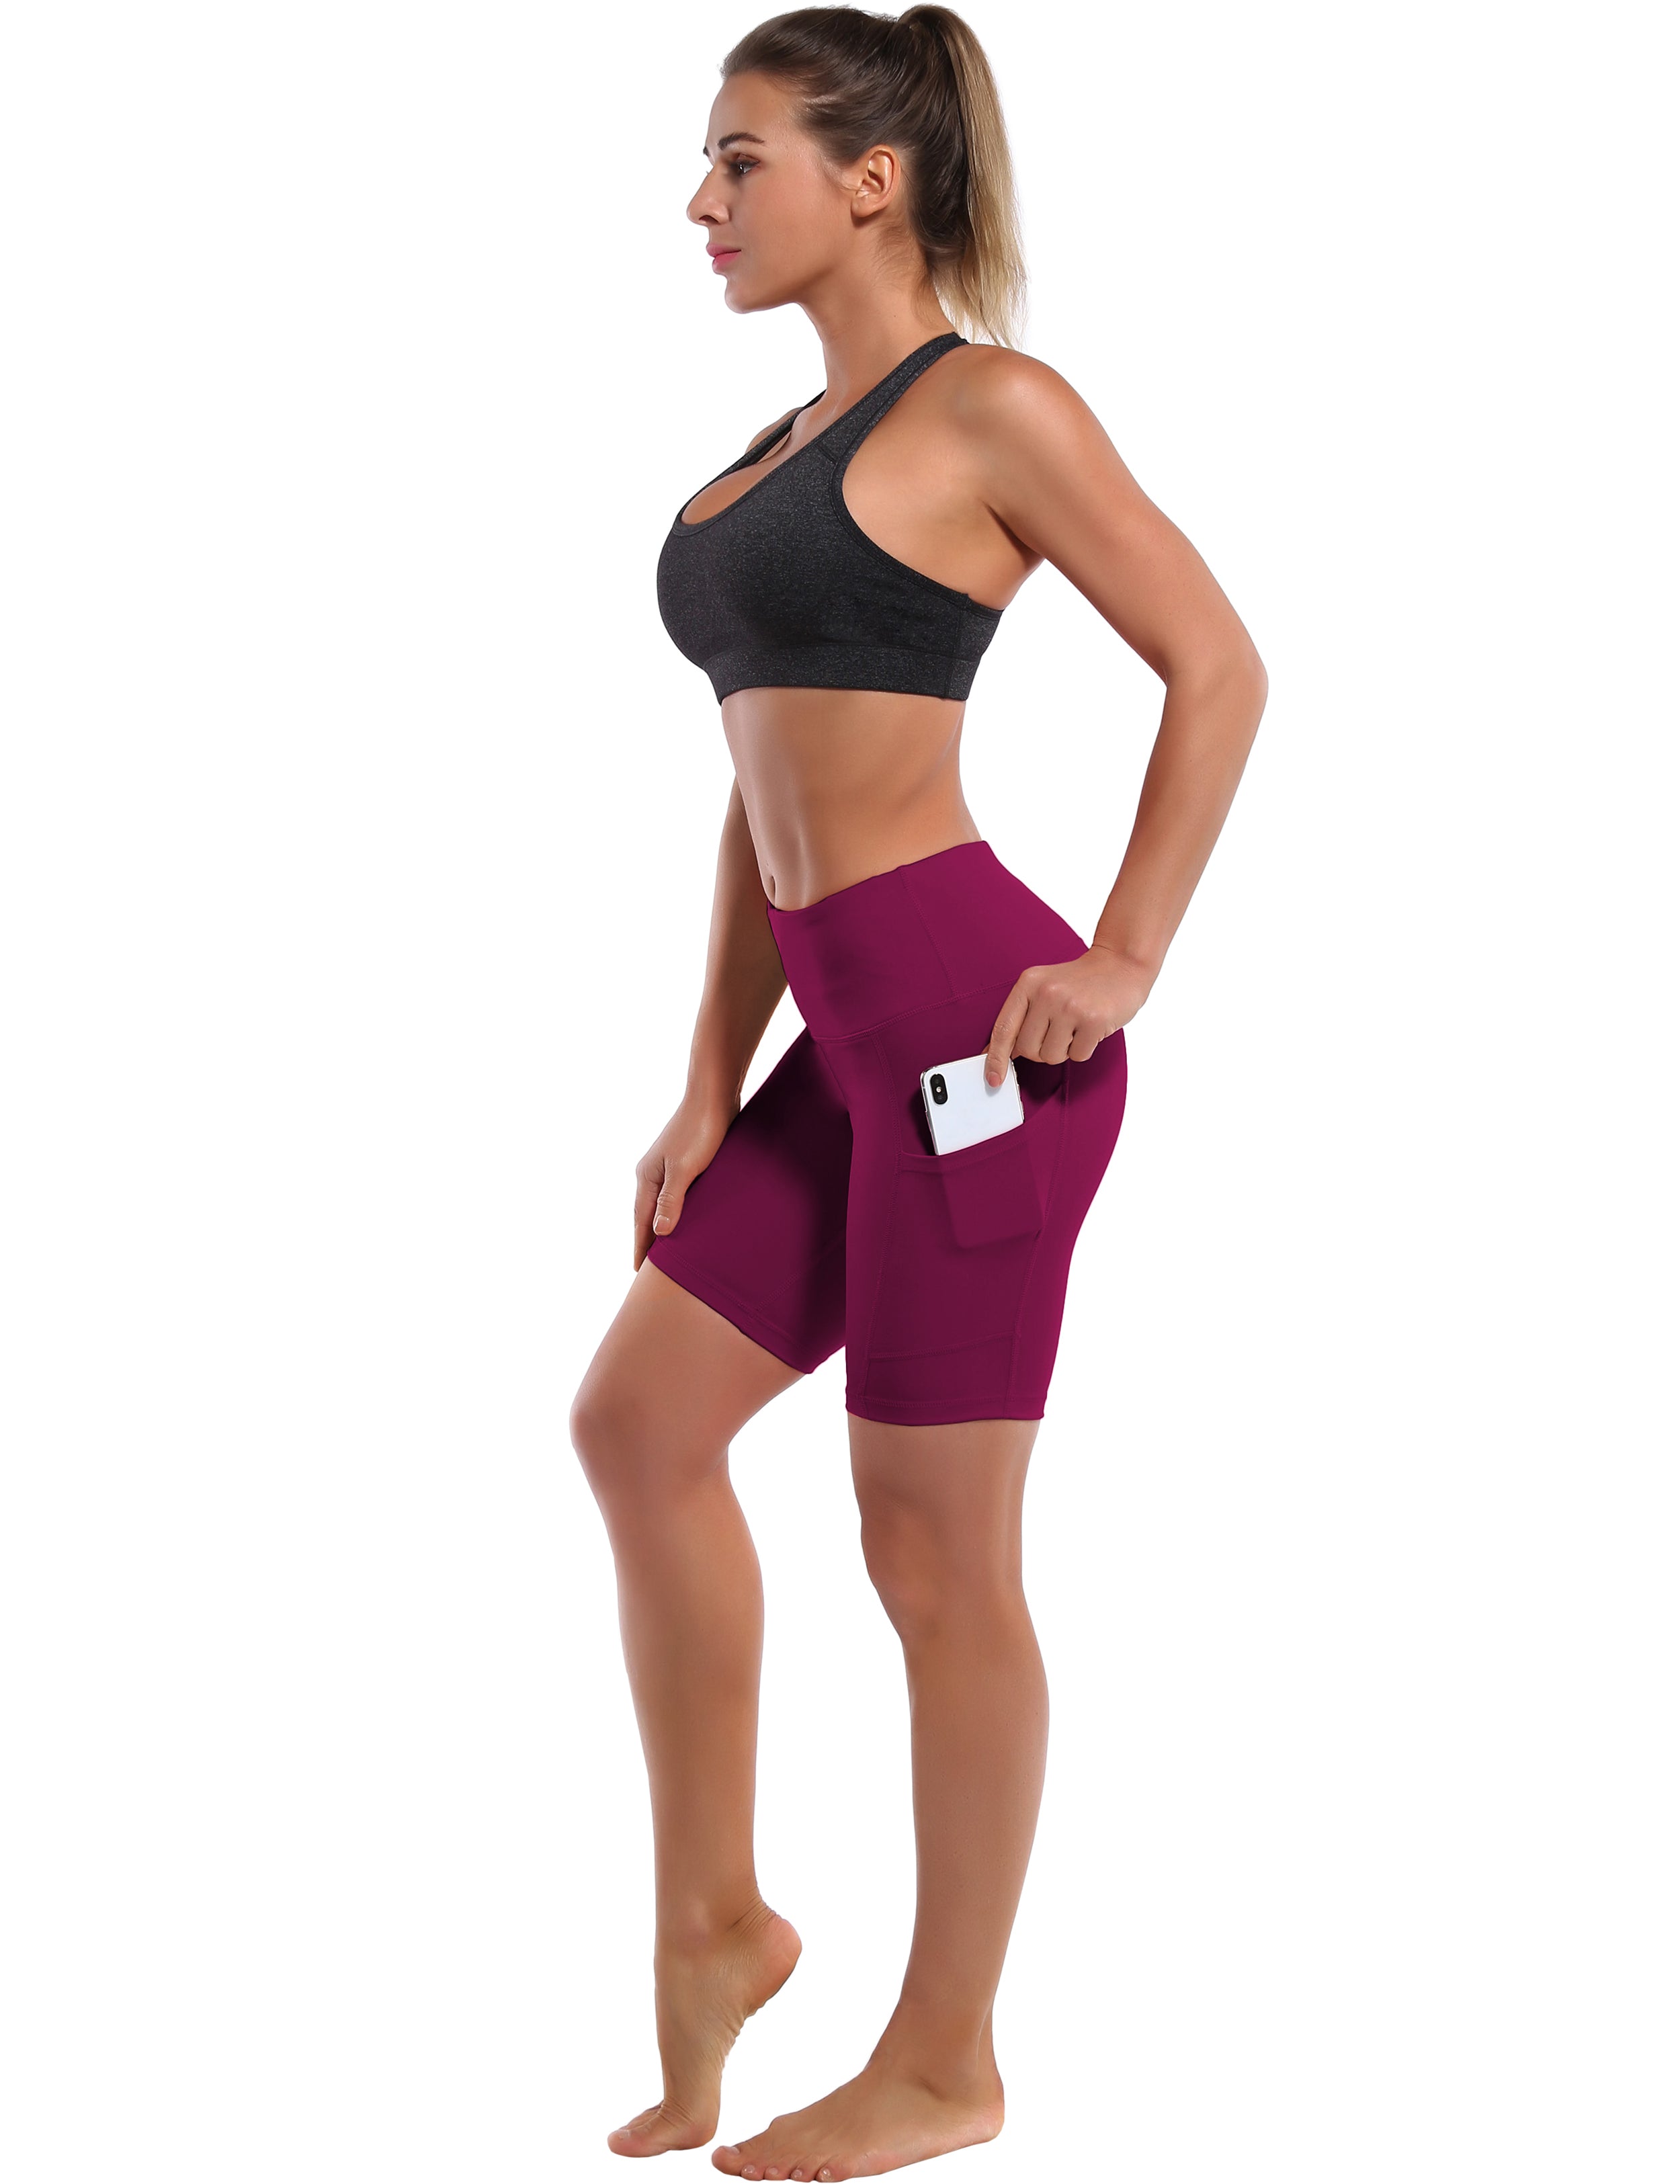 8" Side Pockets Yoga Shorts grapevine Sleek, soft, smooth and totally comfortable: our newest style is here. Softest-ever fabric High elasticity High density 4-way stretch Fabric doesn't attract lint easily No see-through Moisture-wicking Machine wash 75% Nylon, 25% Spandex